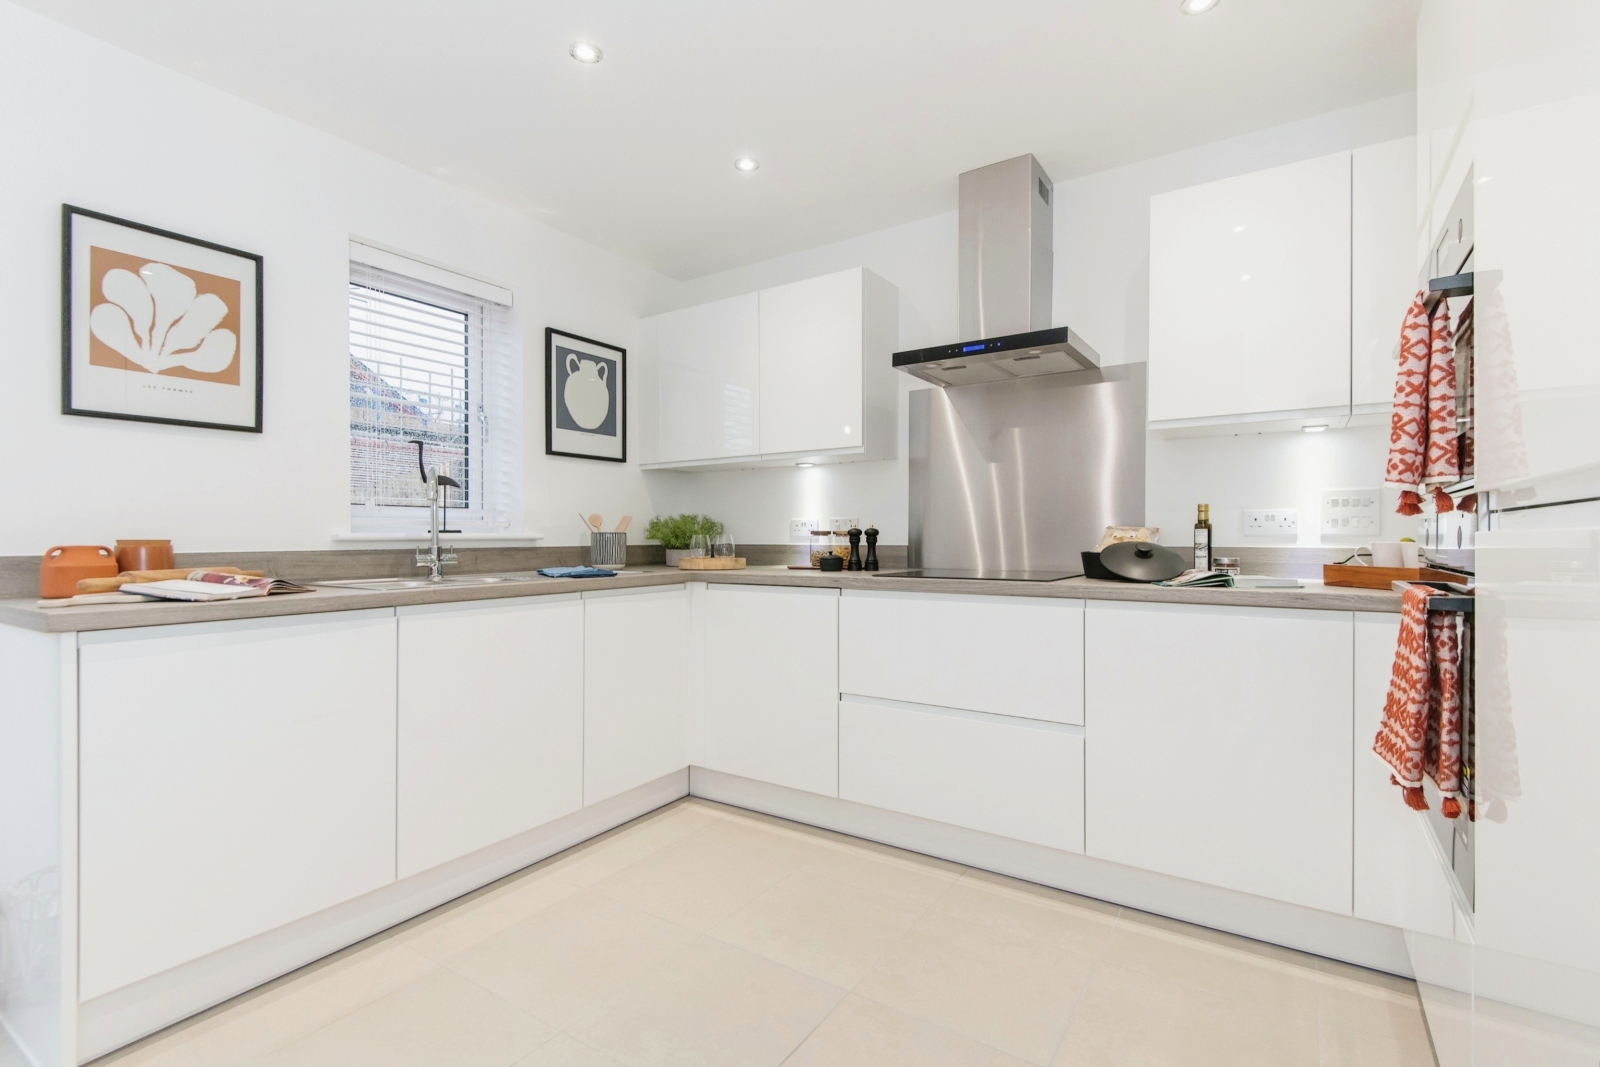 2 bed house for sale in Grange Road, Netley Abbey  - Property Image 3